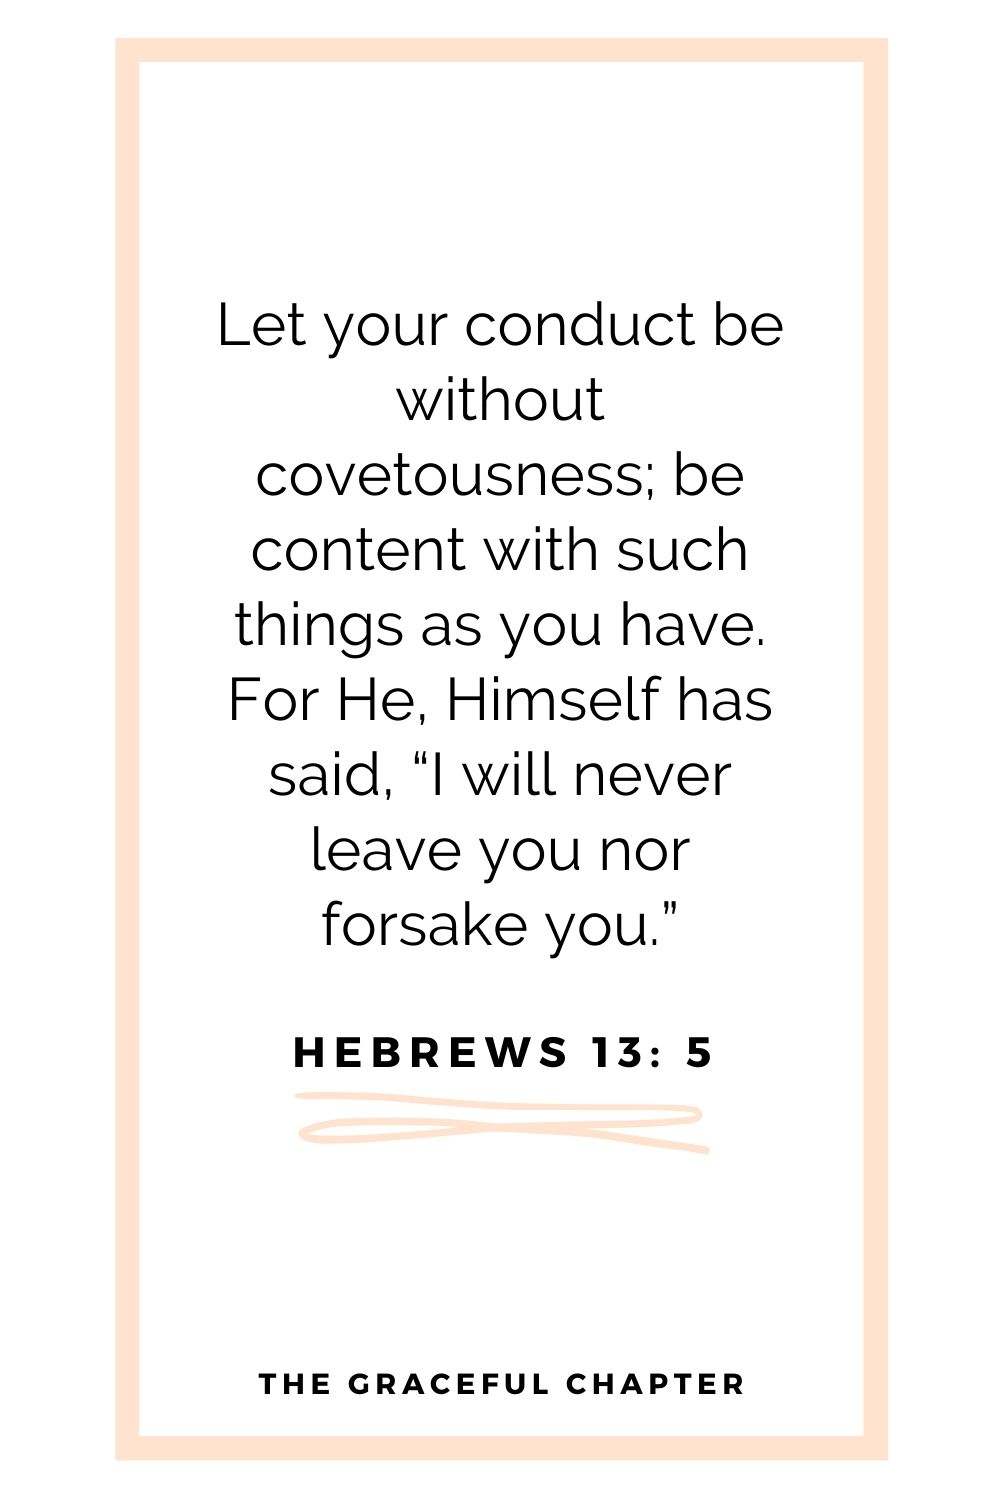 Let your conduct be without covetousness; be content with such things as you have. For He Himself has said, “I will never leave you nor forsake you.” Hebrews 13: 5